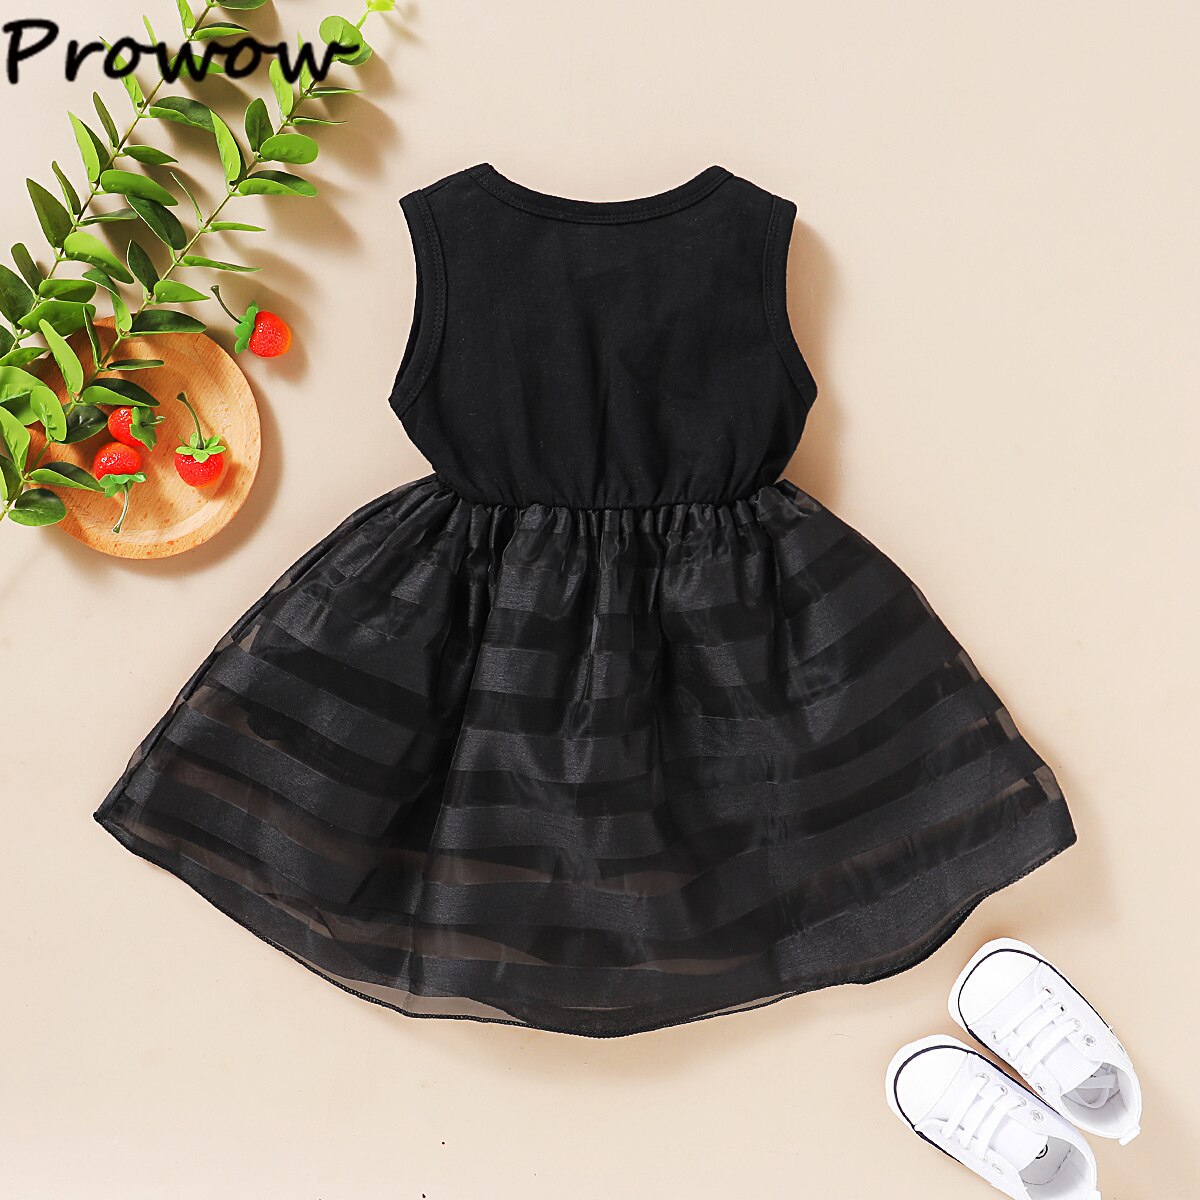 Prowow-1-6Y-Black-Girls-Dresses-Summer-Sleeveless-Patchwork-Mesh-Party-Toddler-Dresses-For-Baby-Kids-1